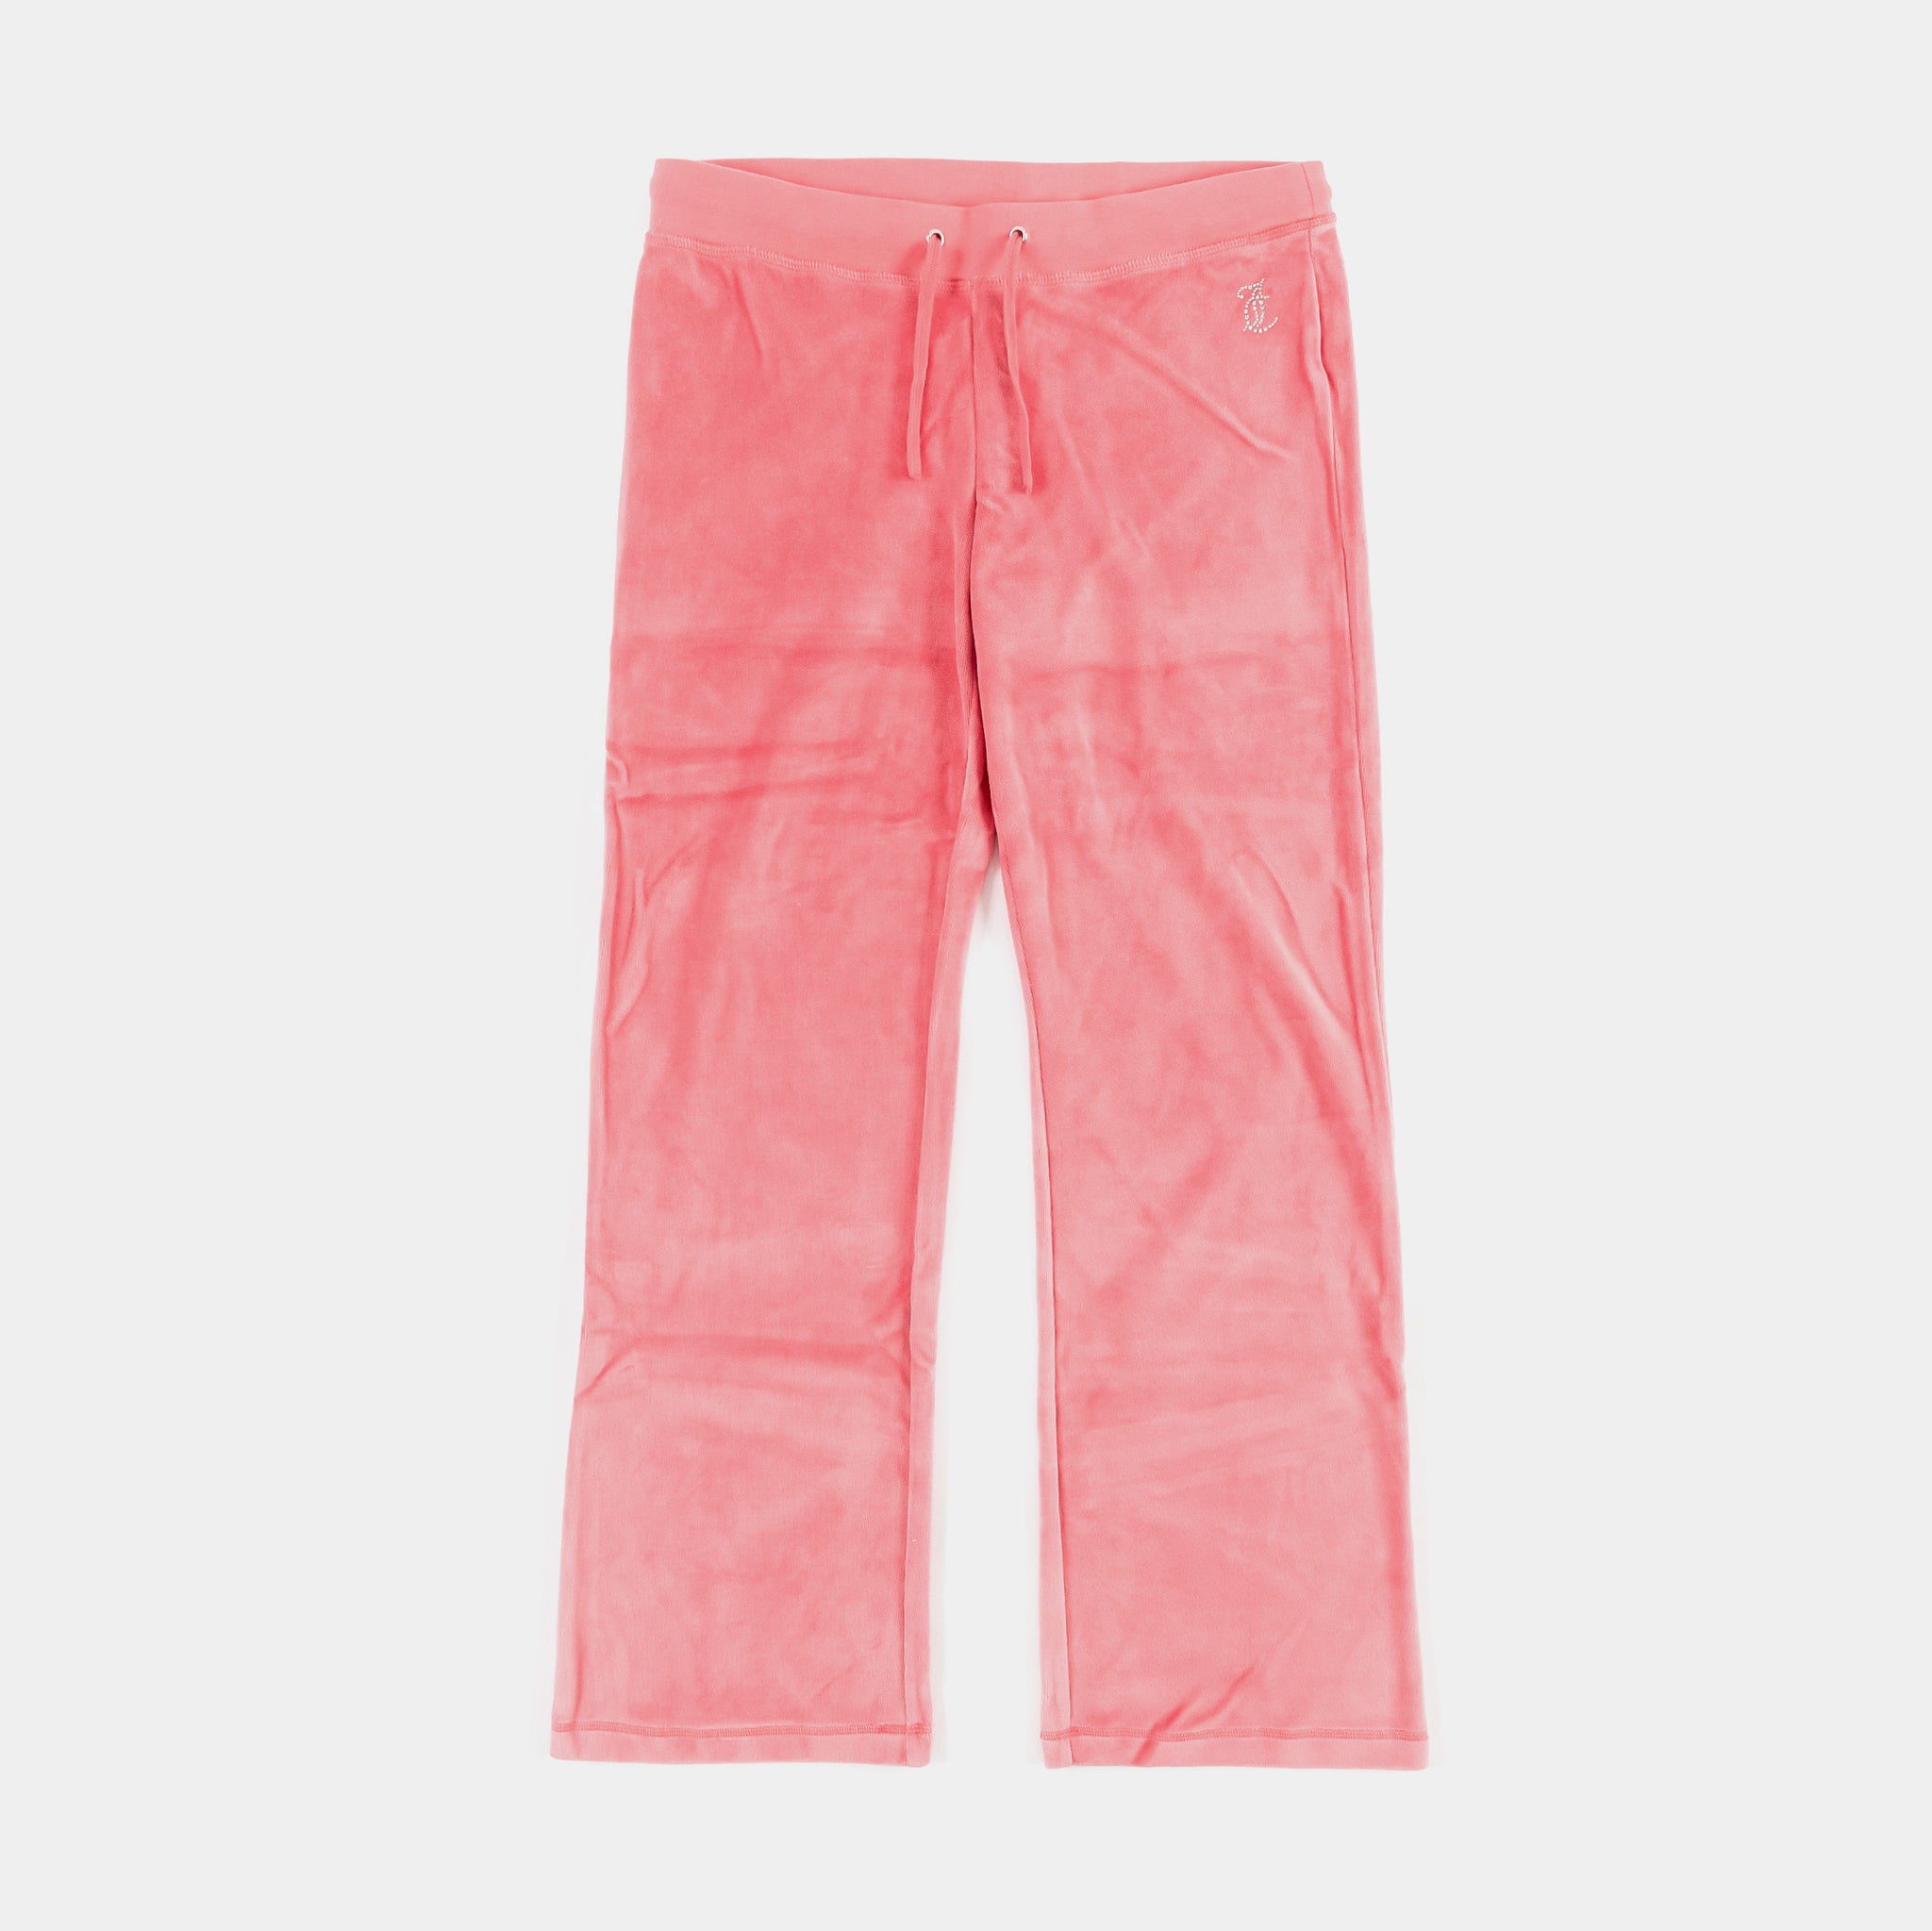 Juicy Couture For UO Stirrup Velour Legging | Urban Outfitters